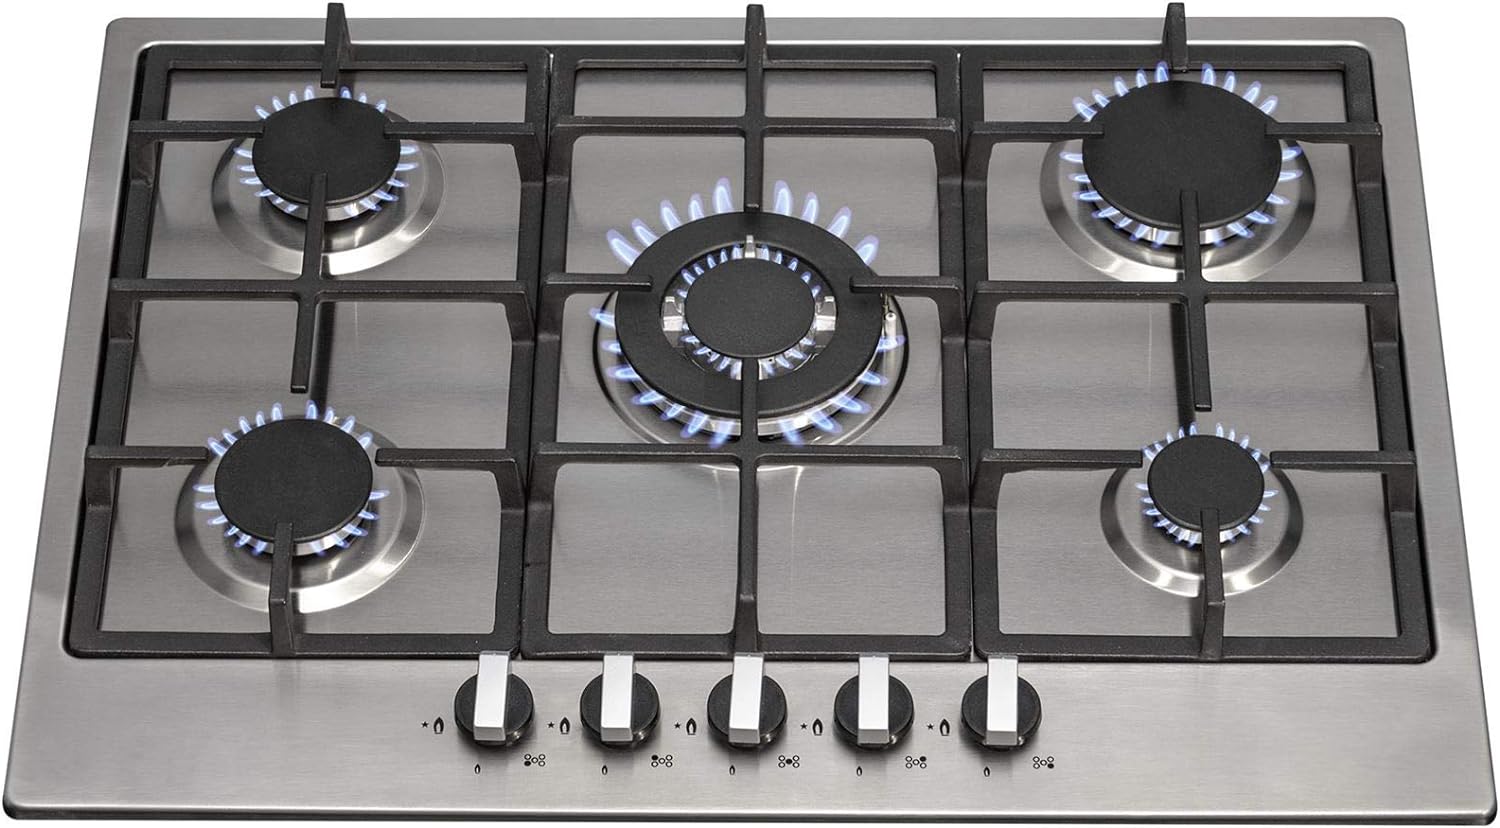 SIA R6 70cm Stainless Steel 5 Burner Gas Hob With Iron Pan Stands & Wok Burner - Amazing Gadgets Outlet